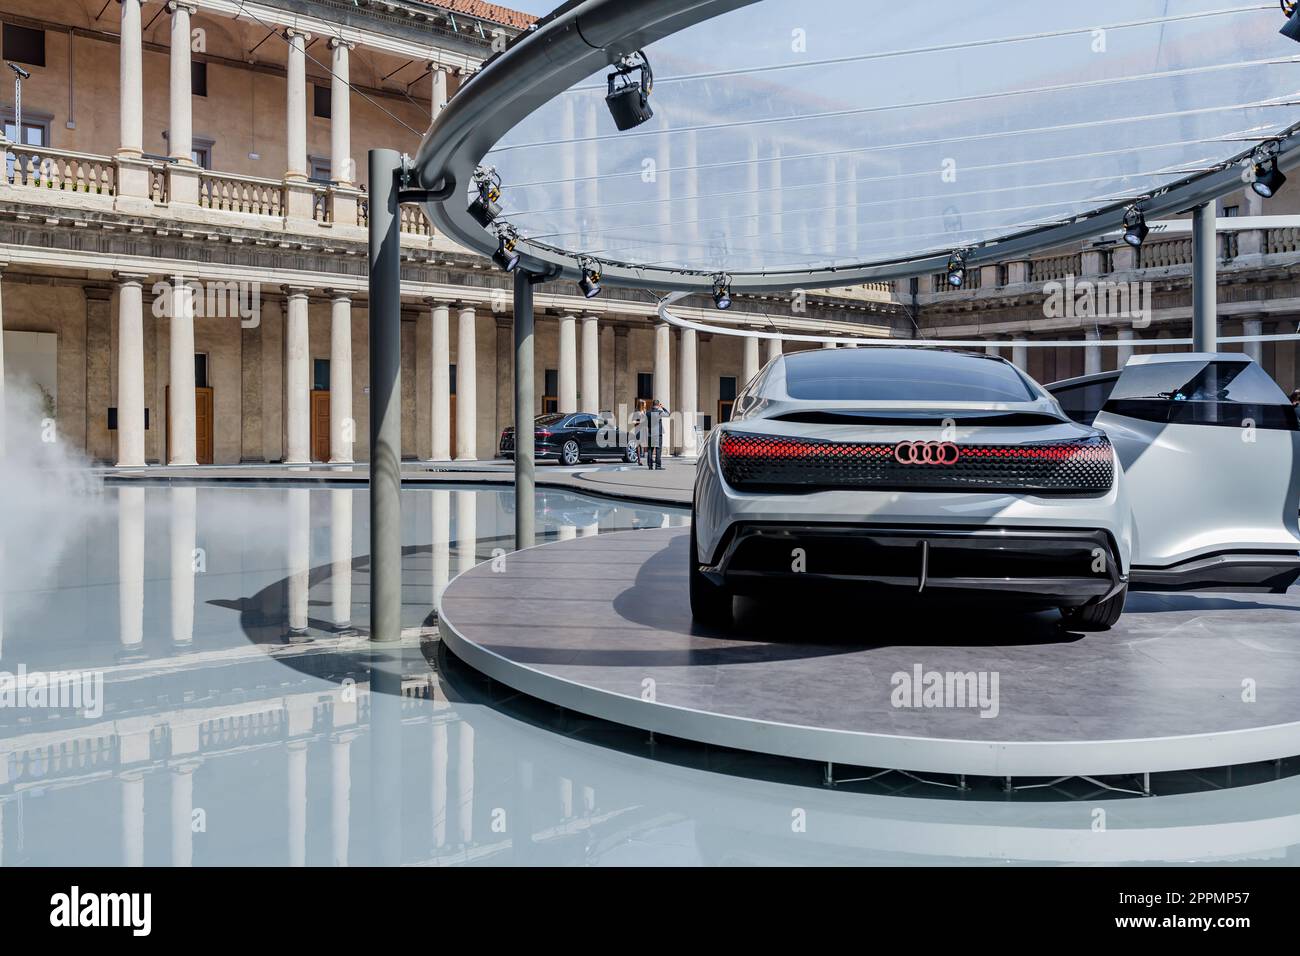 MILAN, ITALY - APRIL 16 2018: Audi city lab event. New models are presented during the design week in Milan. Stock Photo